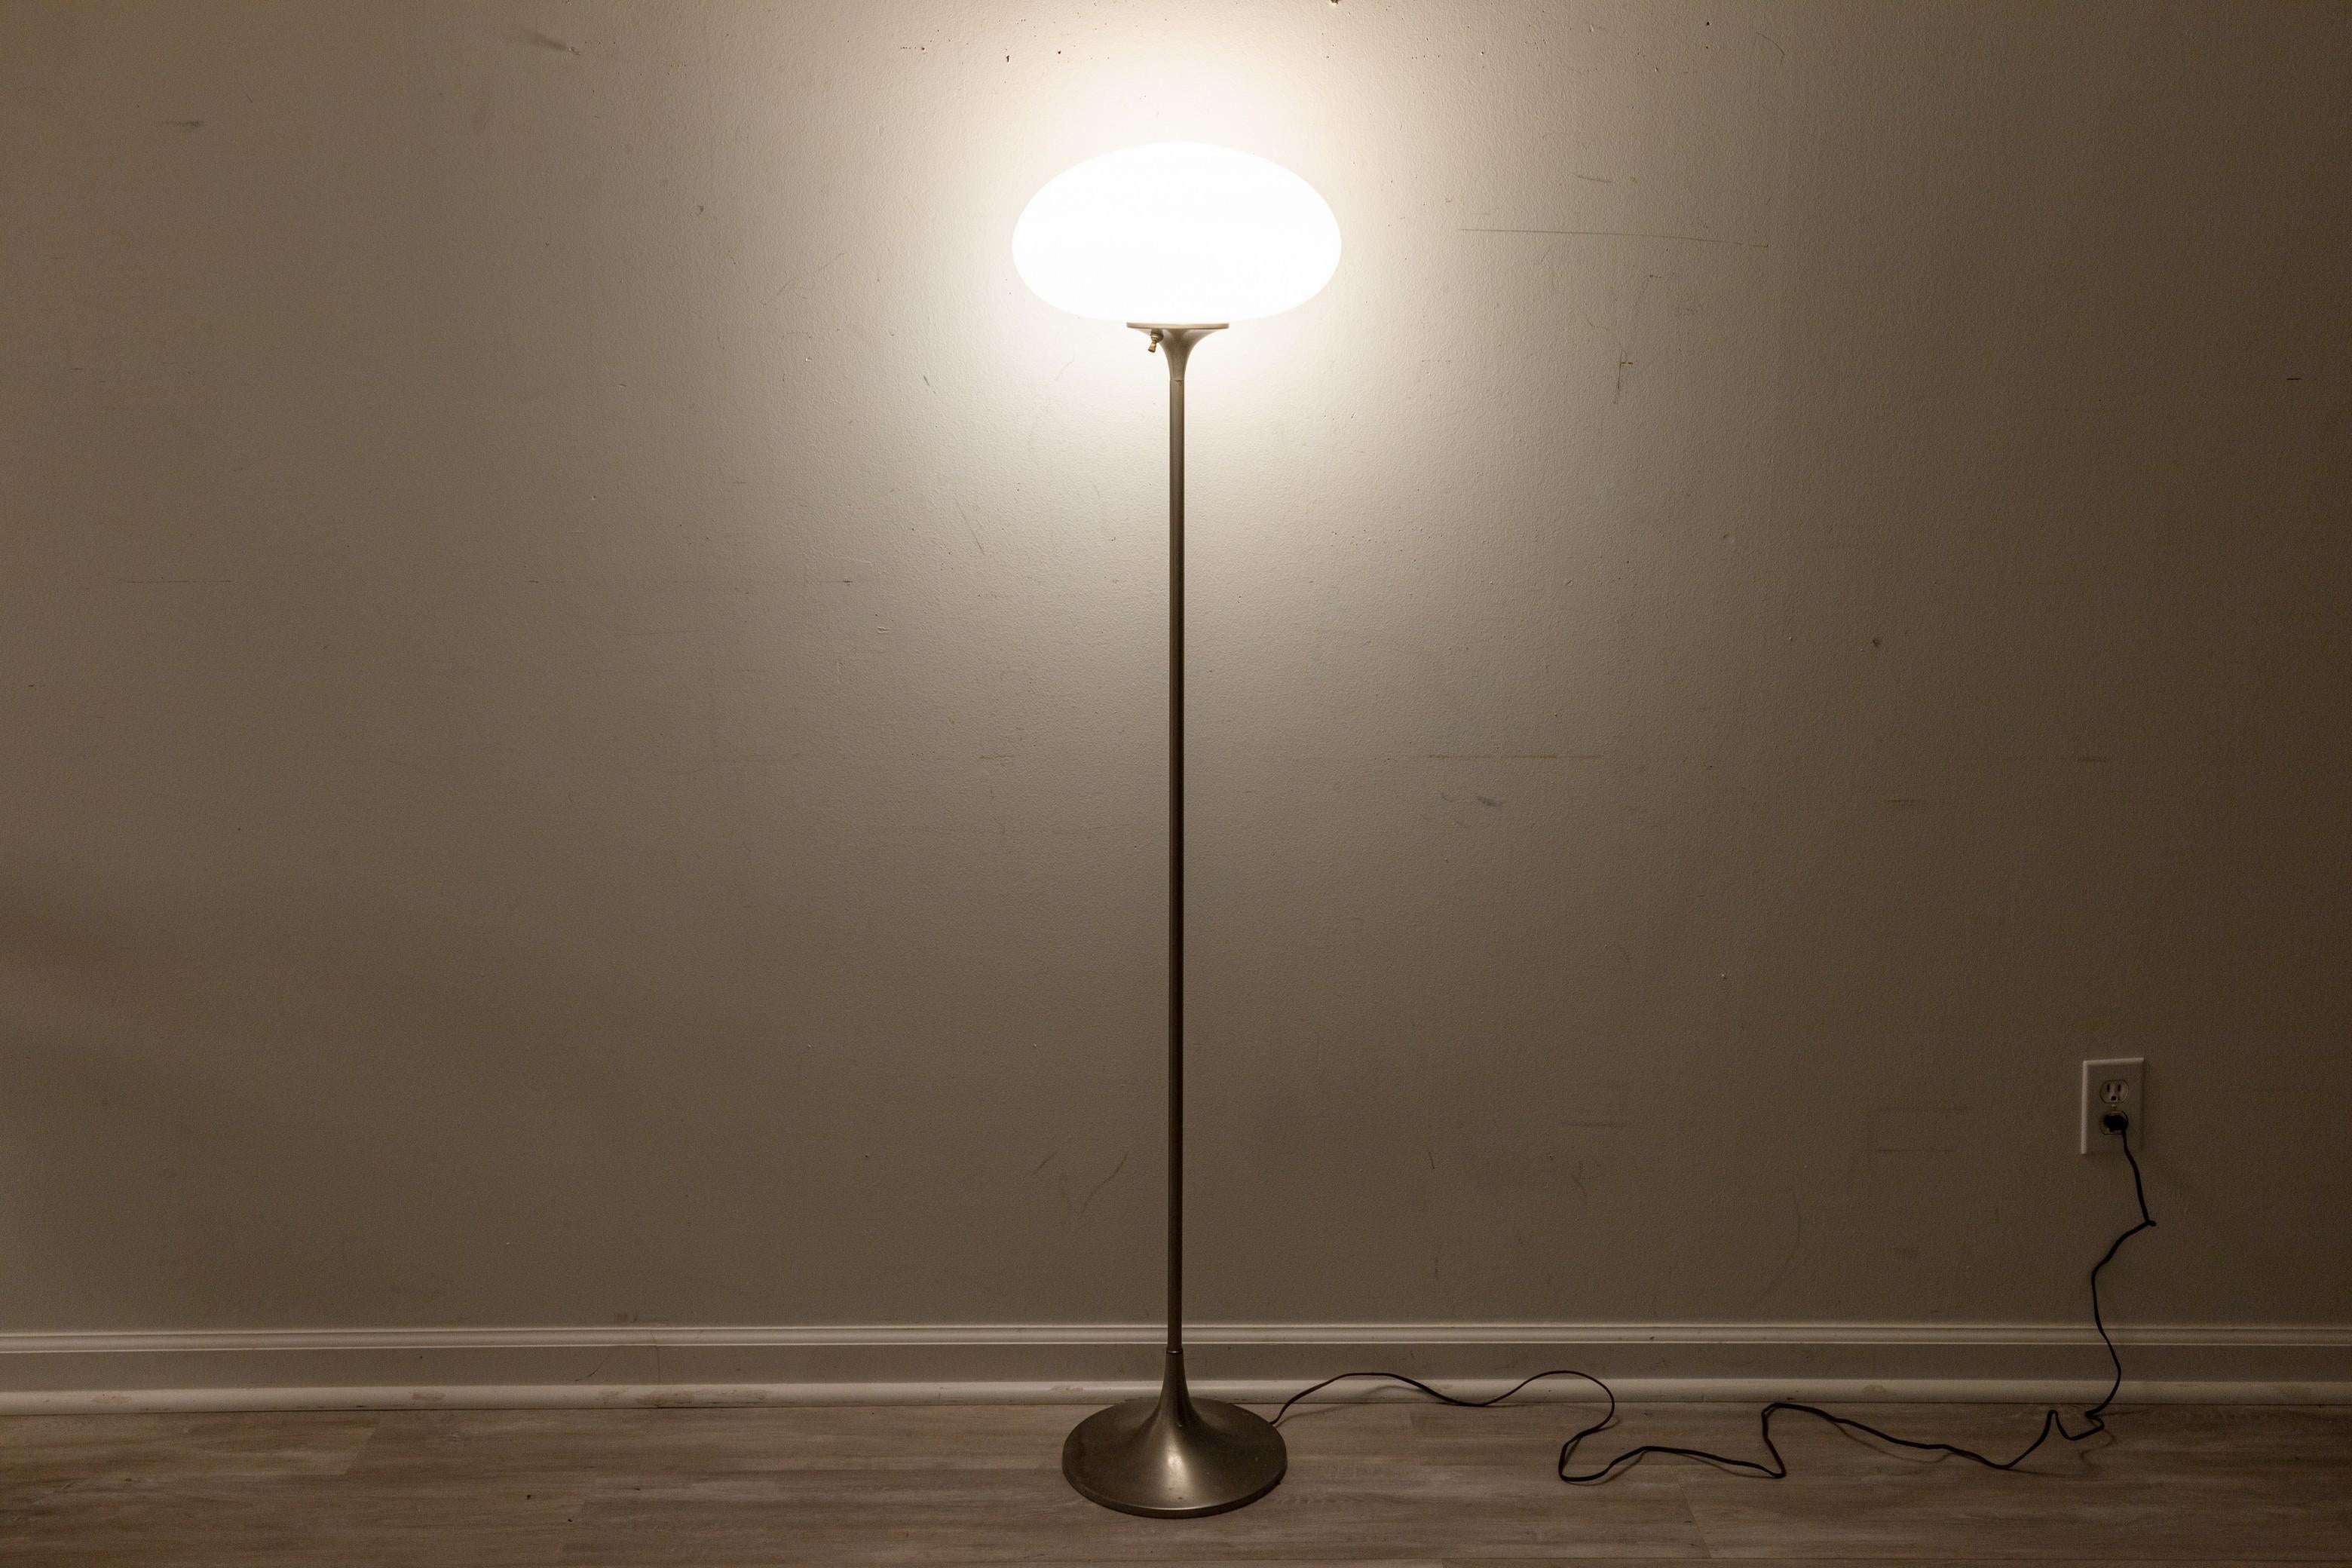 A Laurel Lamp Company mushroom floor lamp. A lovely mid century modern floor lamp featuring a brushed metal base and center pole, and a removable white smoked glass lamp shade. This beautiful floor lamp has a small analog knob to turn the light on